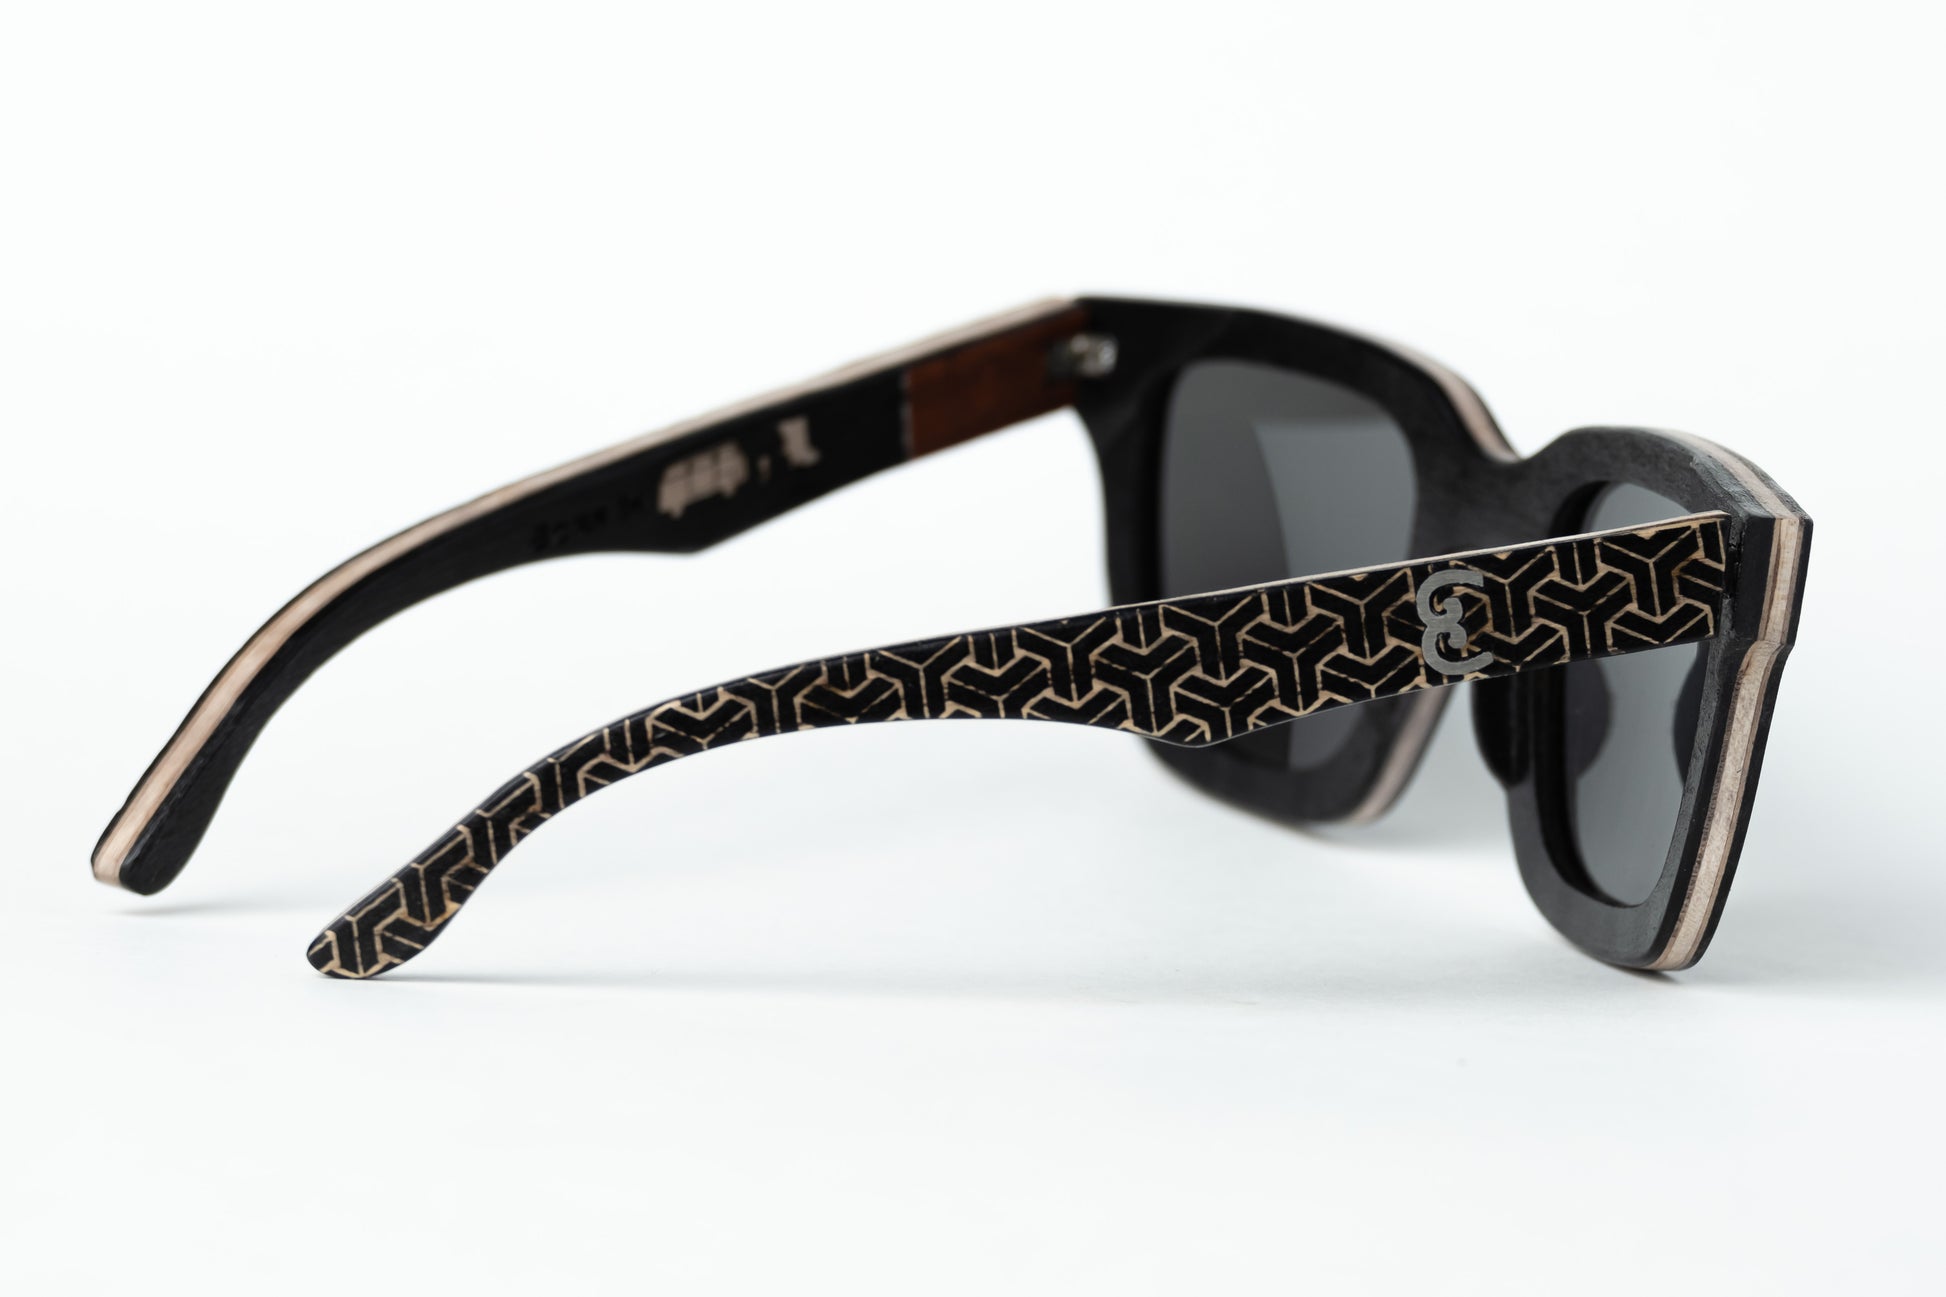 oak inlay pattern in wood frame sunglasses with polarized lenses